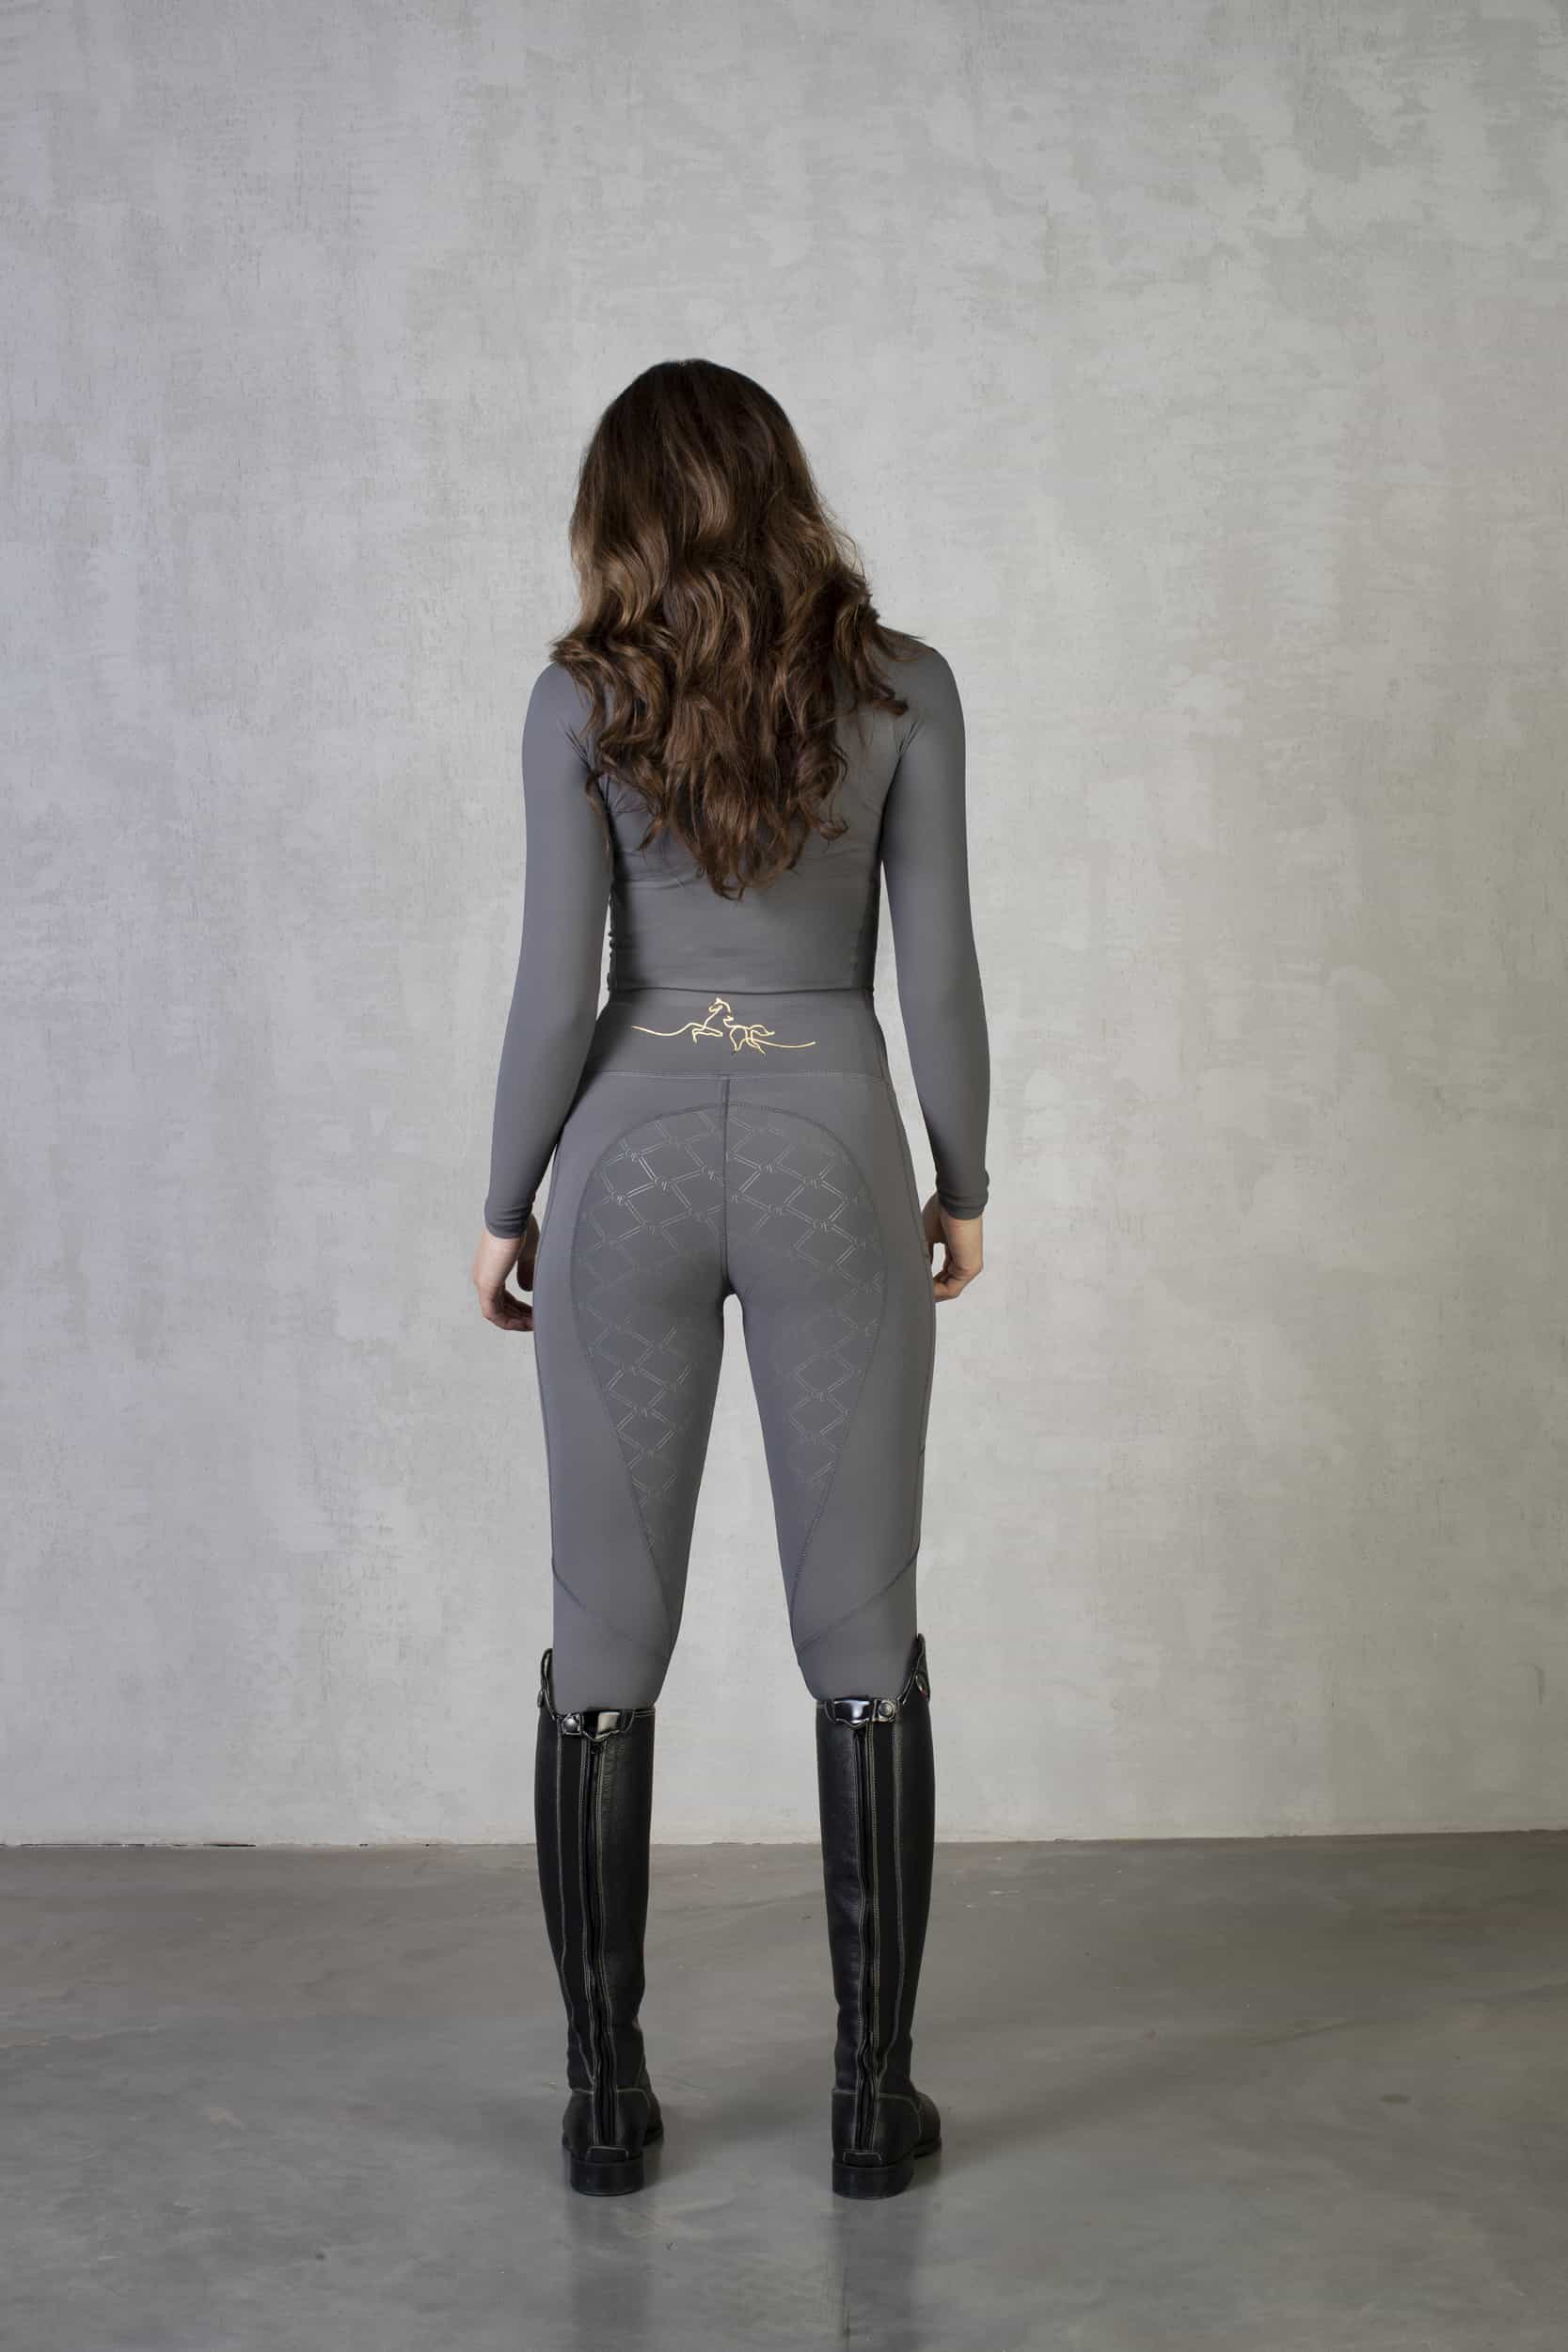 Grey Winter Leggings with POCKETS (Misses/Teen)